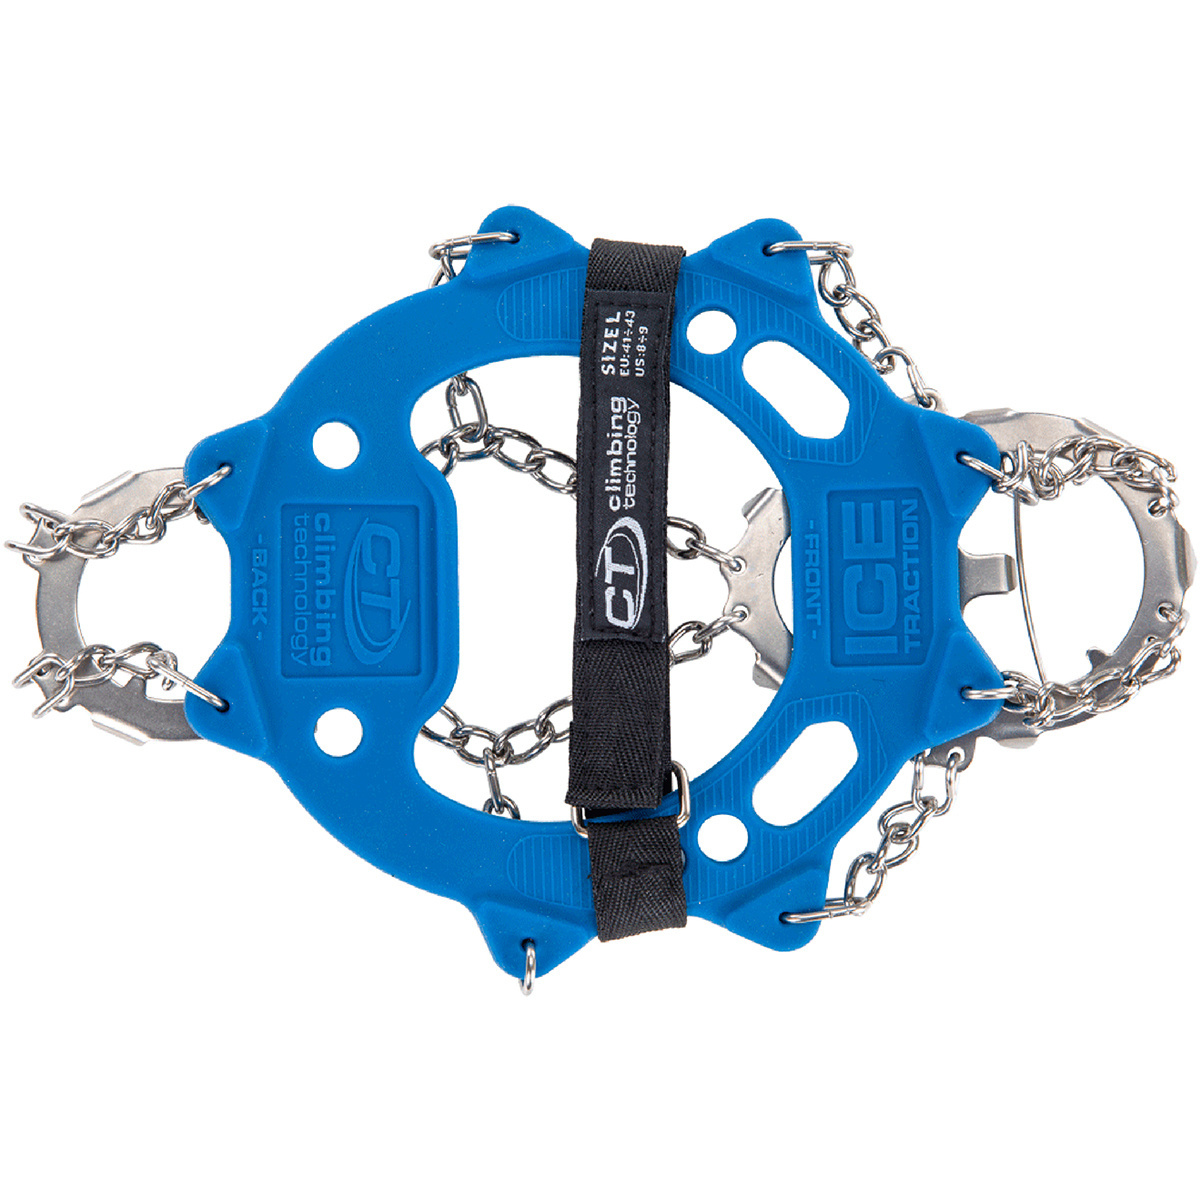 Image of Climbing Technology Ramponcini da ghiaccio Ice Traction Crampons Plus